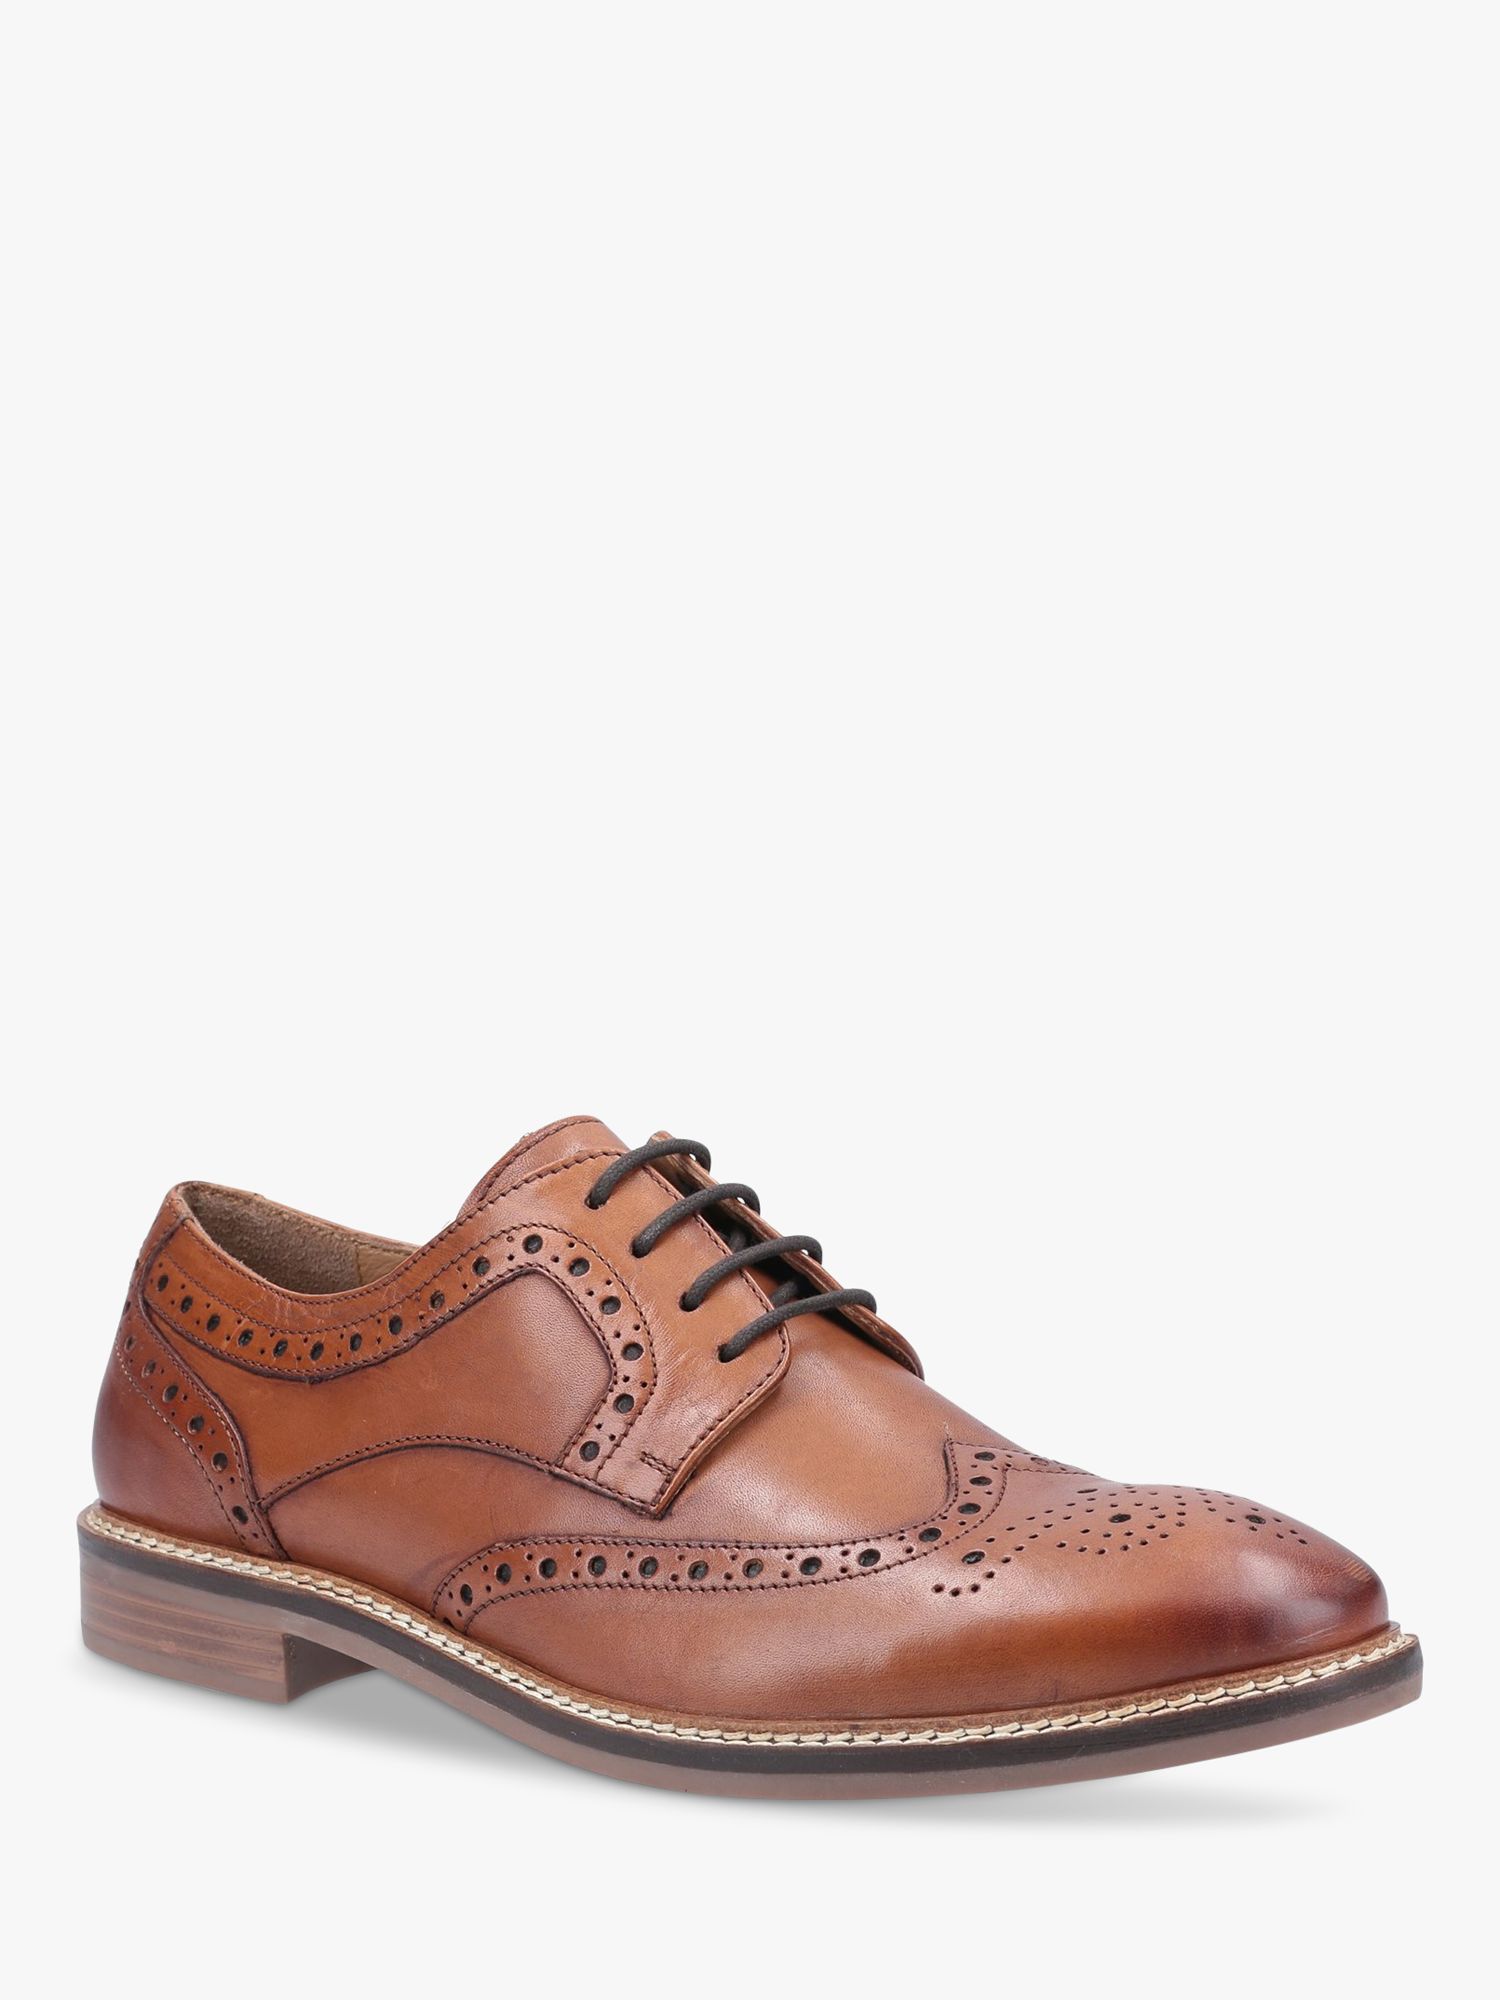 Hush Puppies Bryson Leather Lace Up Brogues, Brown at John Lewis & Partners